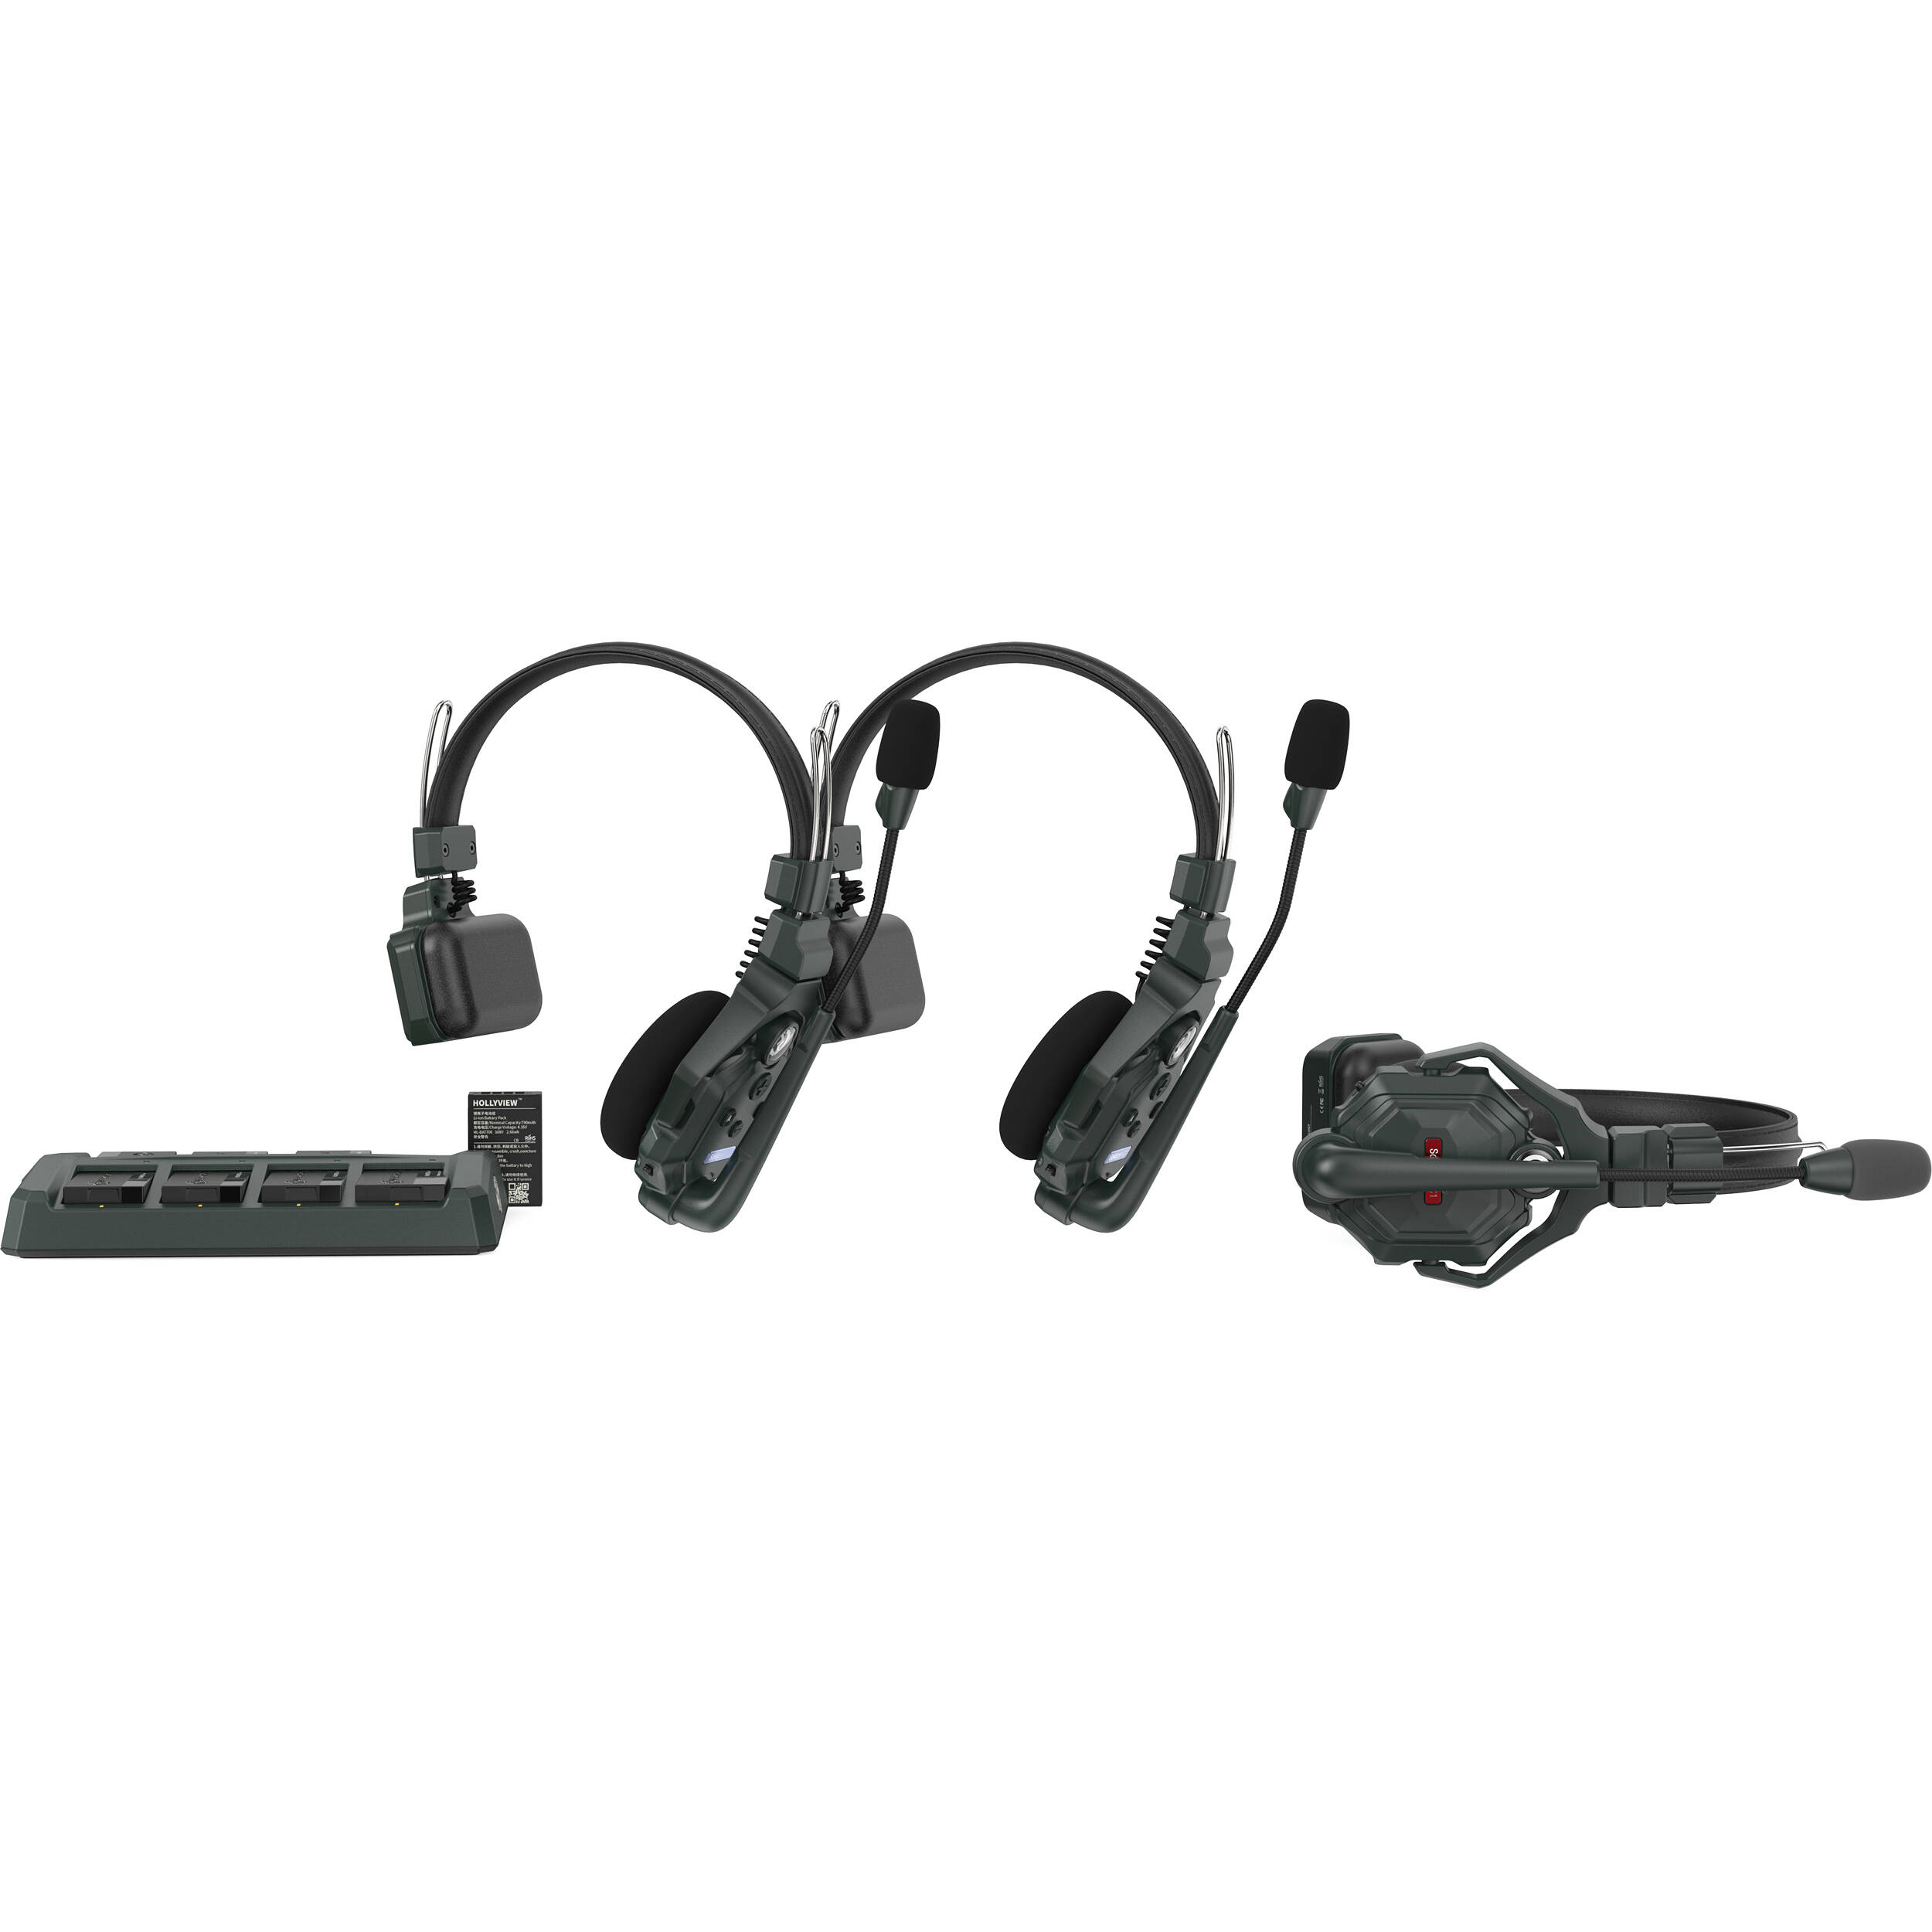 Official] Hollyland Solidcom C1 - Full-Duplex Wireless Intercom Headset  System with DECT - Hollyland